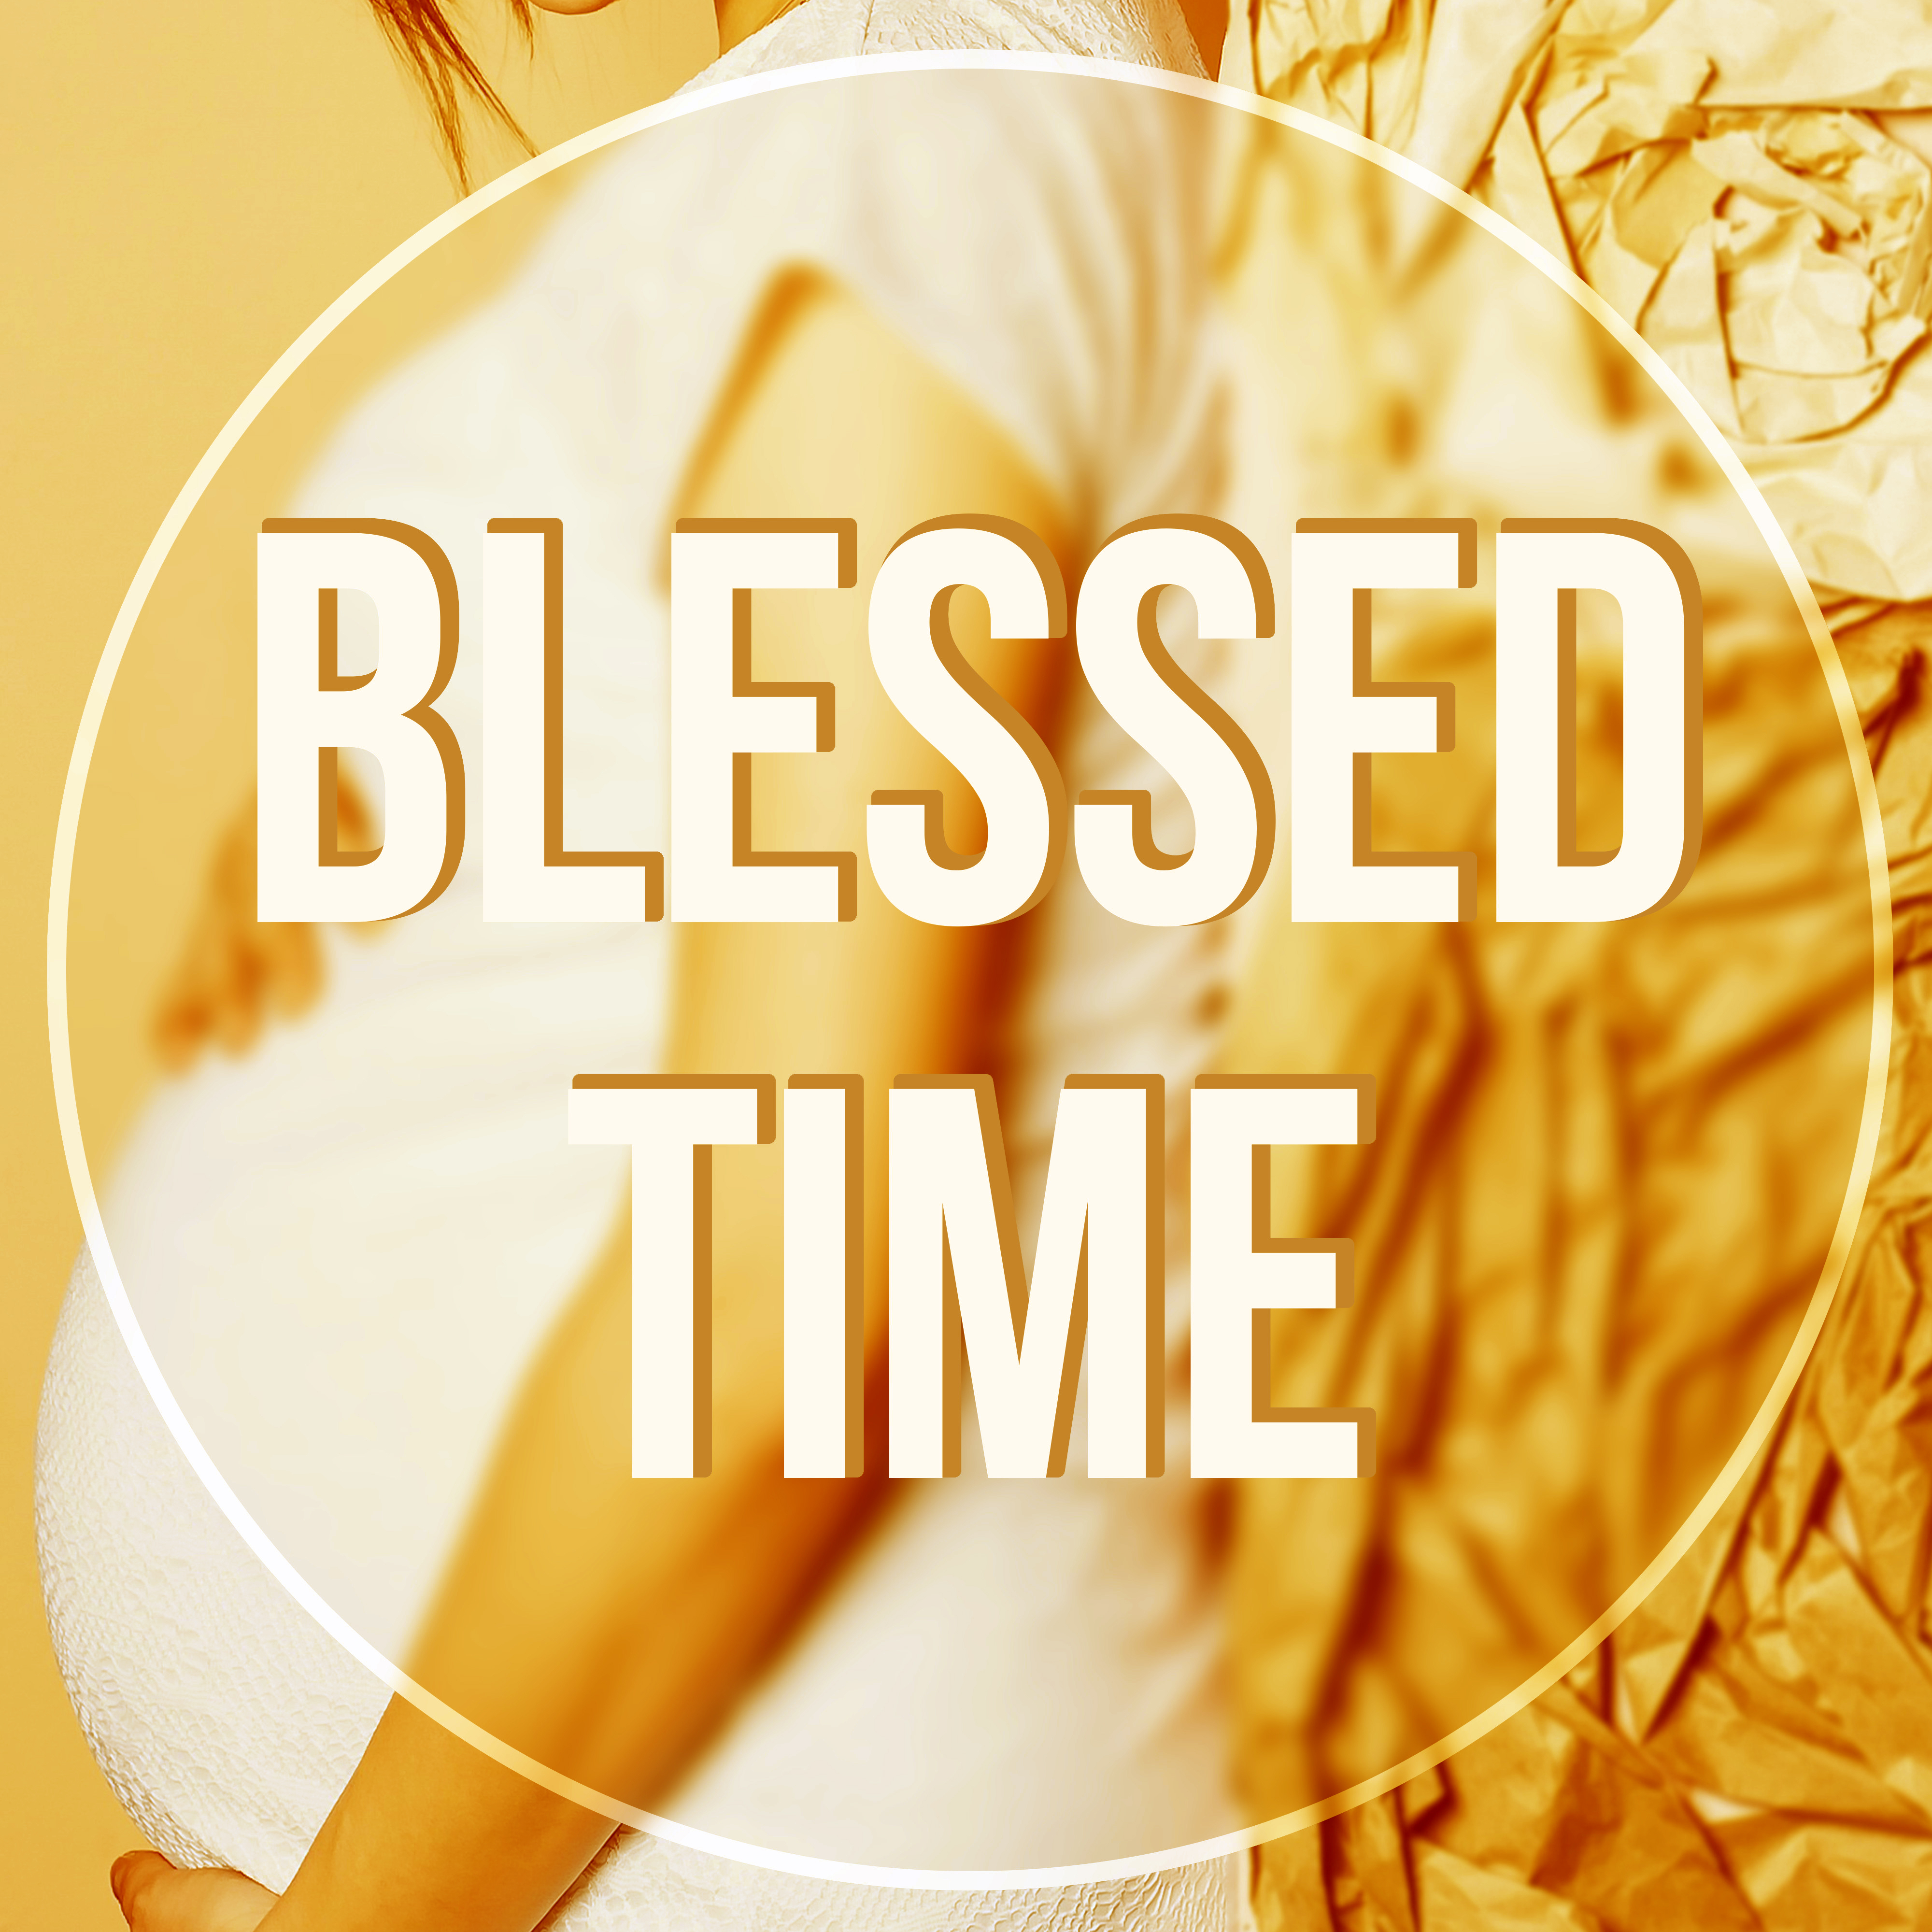 Blessed Time - Music for Easier Labor, Relaxation Meditation, Prenatal Yoga Music, Calm Mommy and Calm Baby